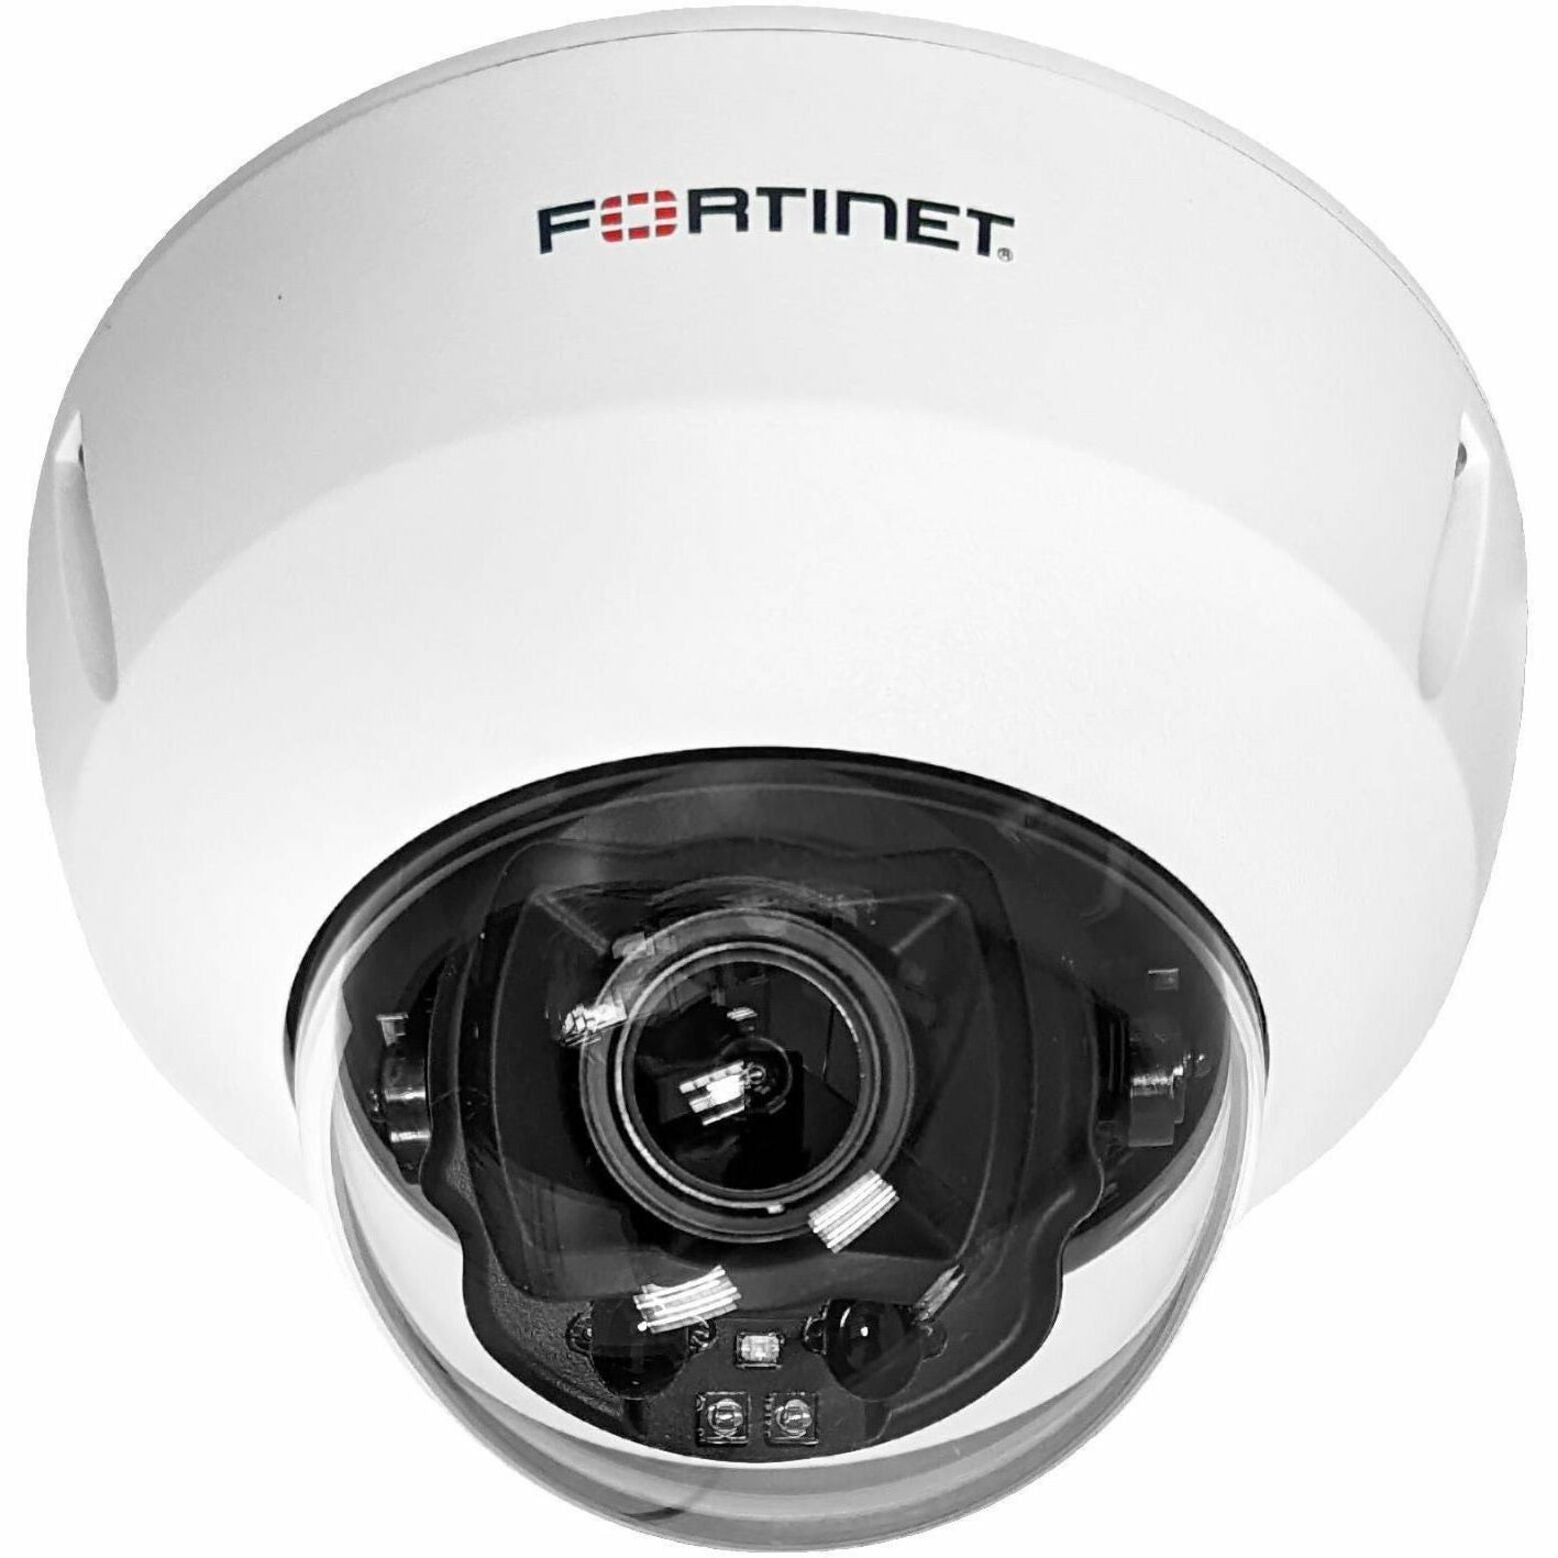 Fortinet FORTICAM-FD55-CA CLOUD ENABLED AI ANALYTICS 5MP FIXED DOME IP CAME (FCM-FD55-CA)